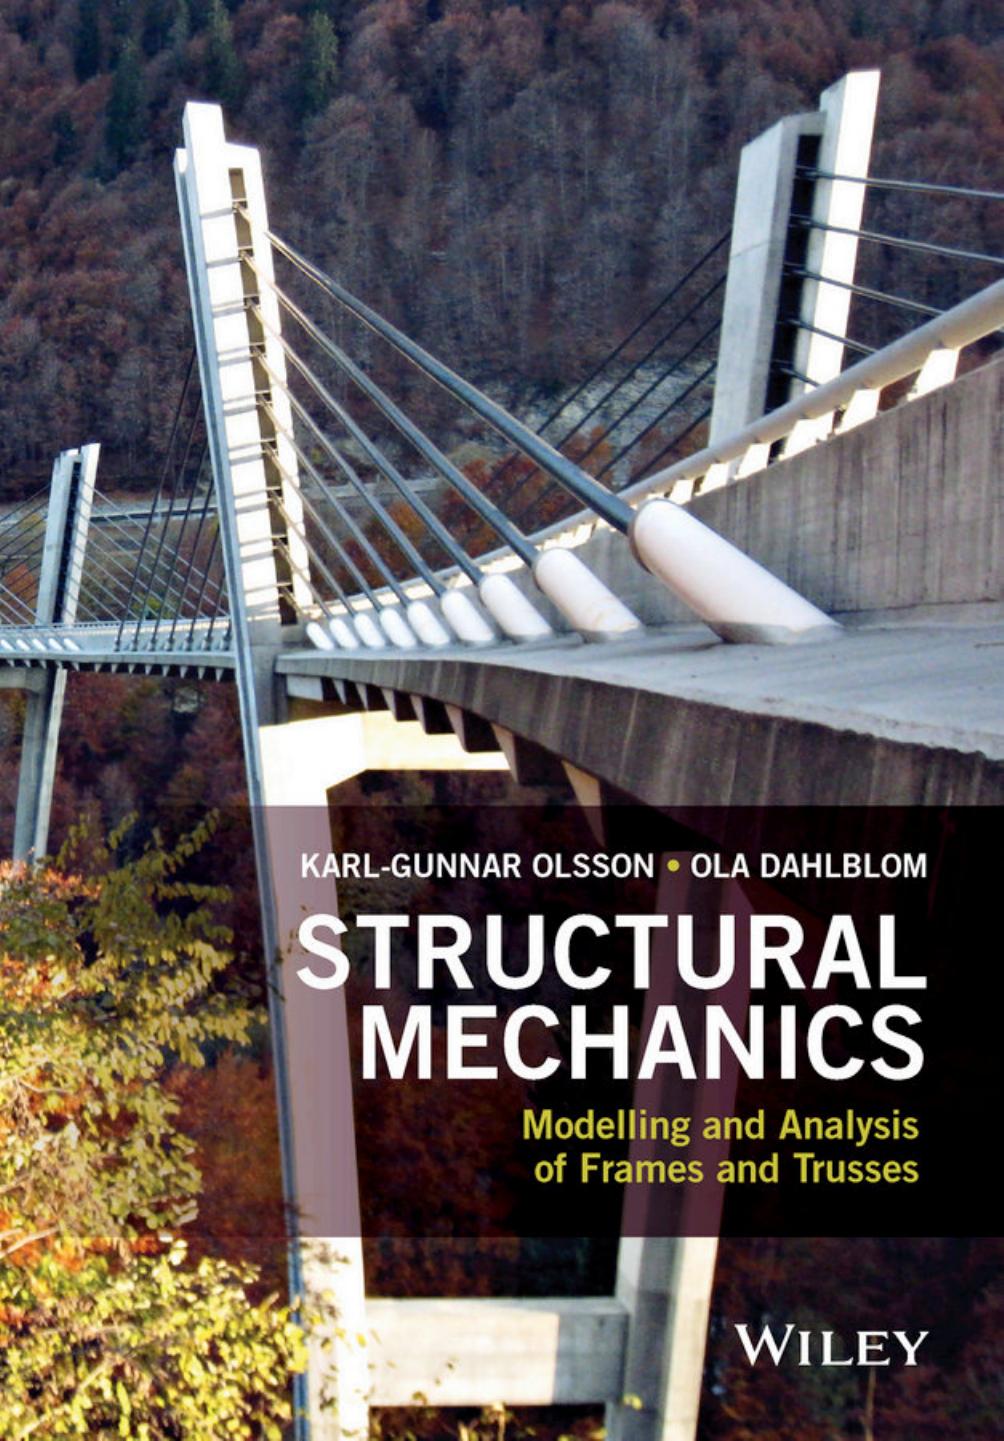 Structural Mechanics: Modelling and Analysis of Frames and Trusses (1st Edition)